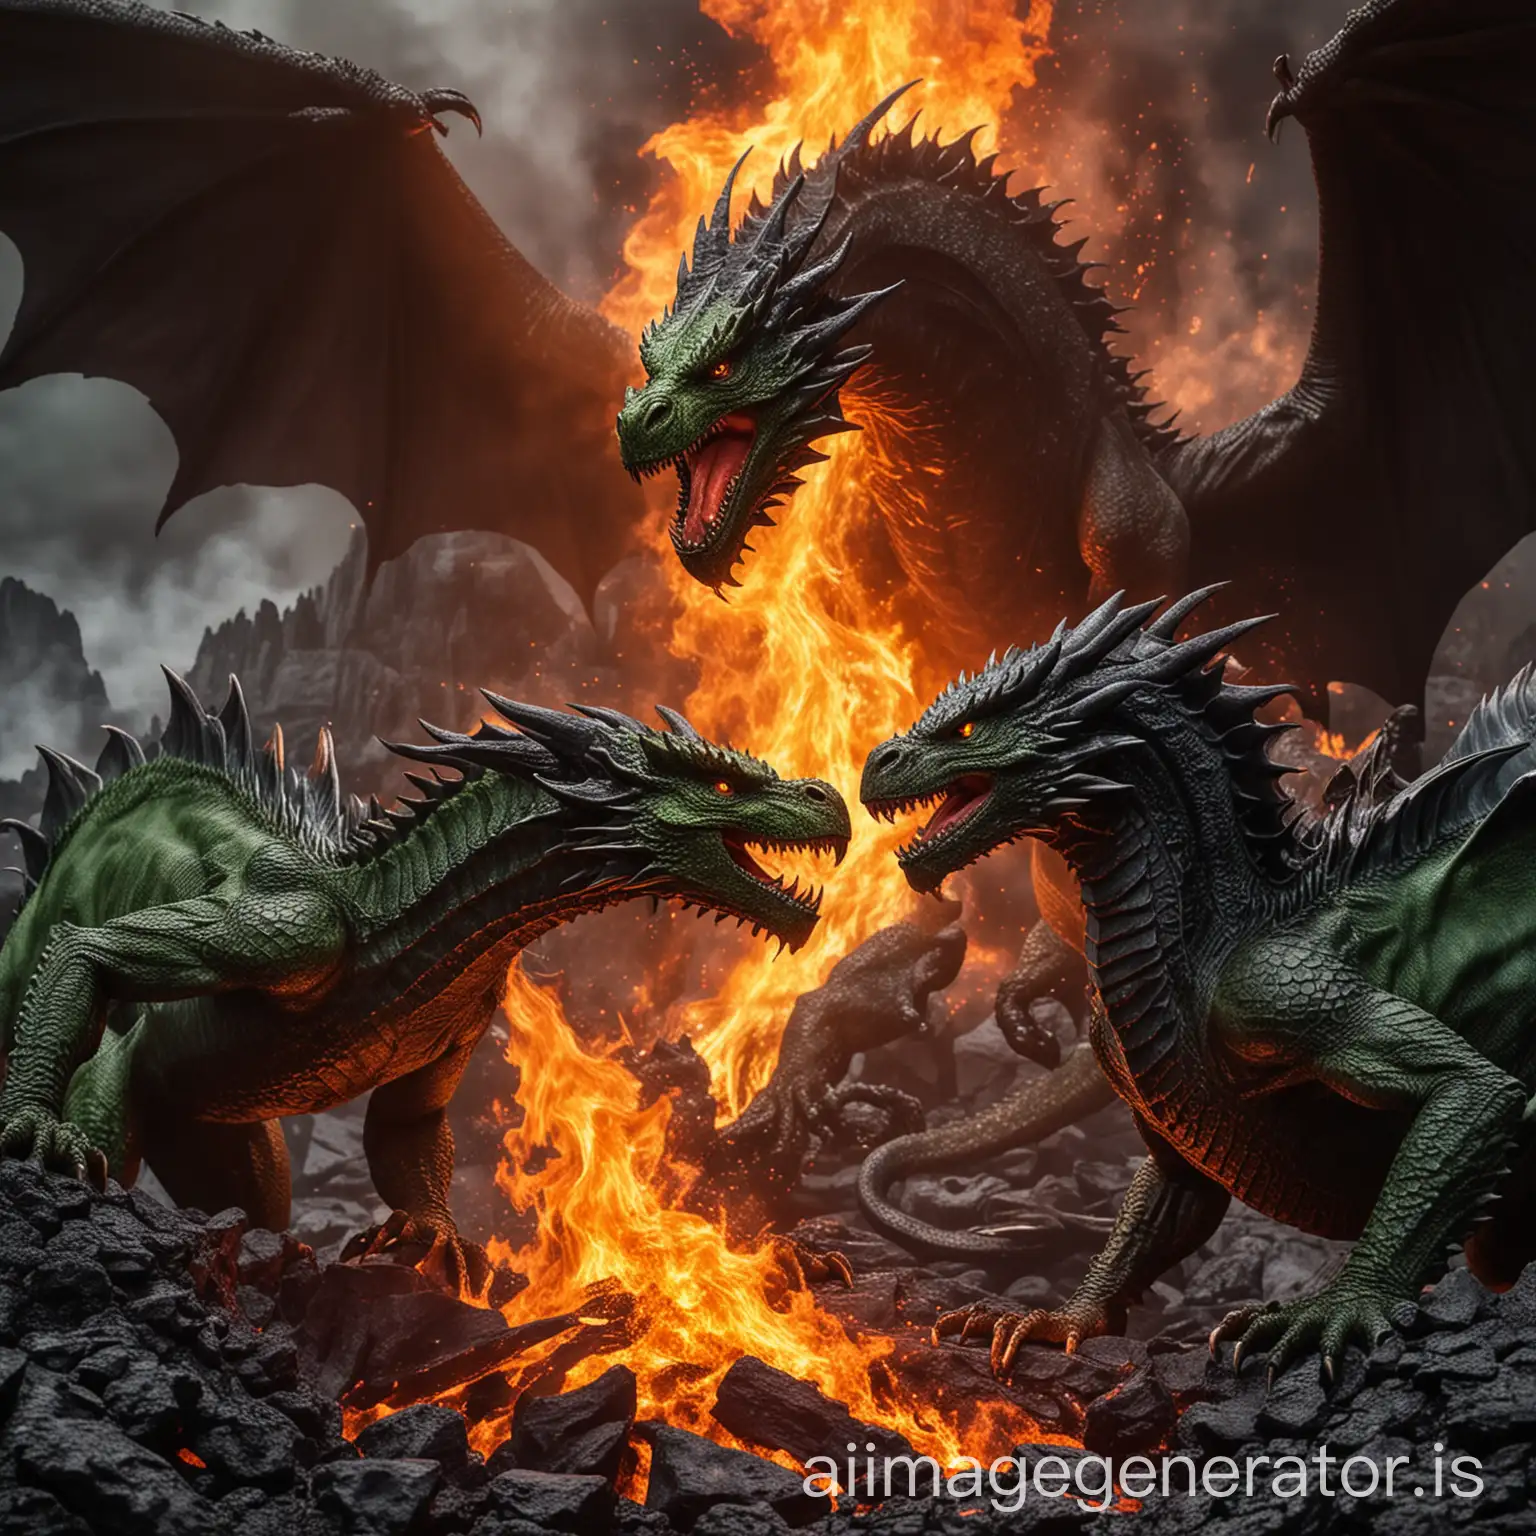 Epic-Battle-of-Green-vs-Black-Dragon-with-Blood-Fire-and-Lava-Eruption